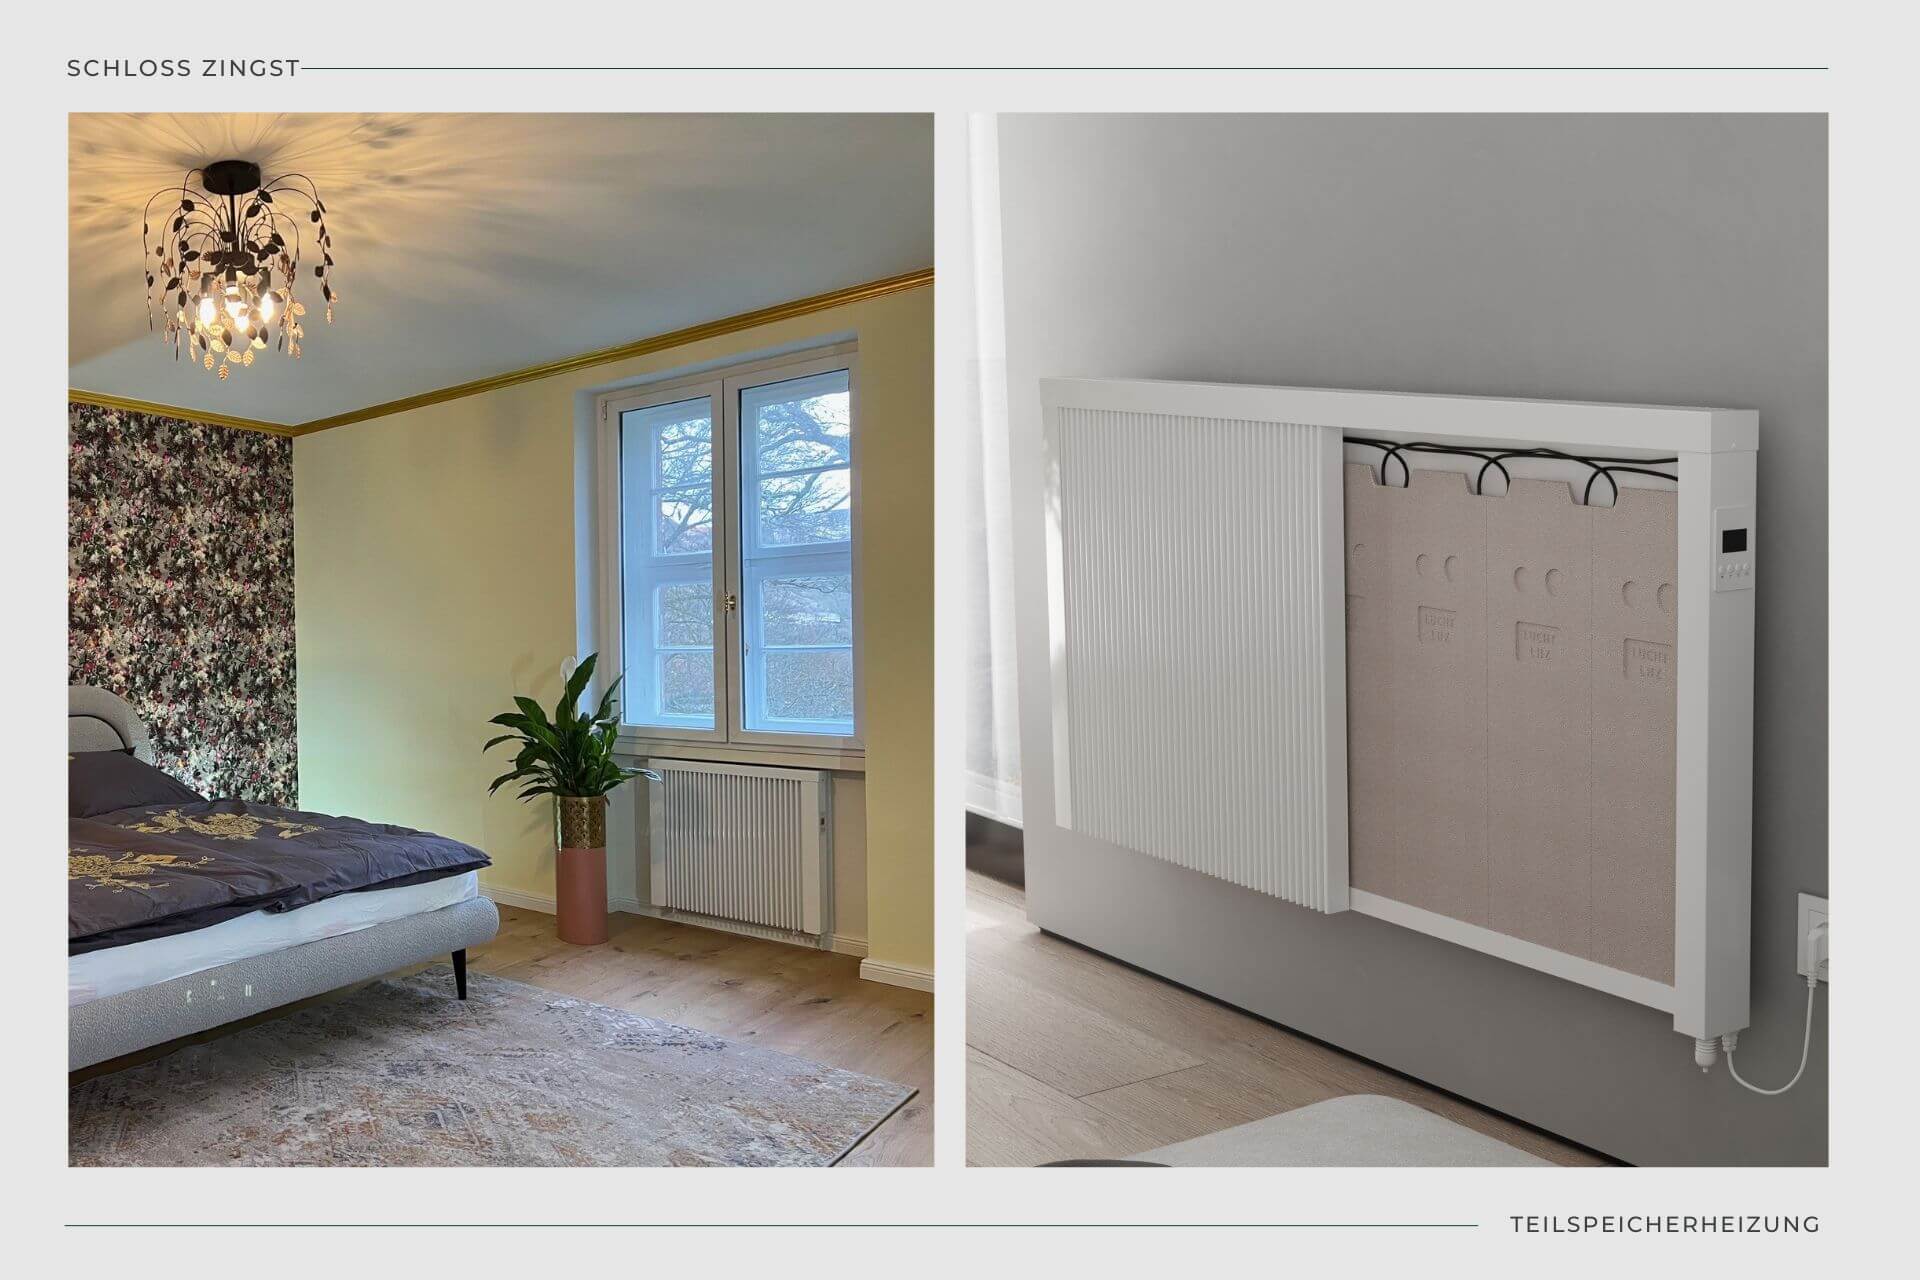 Partial storage heaters in Hotel Schloss Zingst manufactured by Lucht LHZ electric radiators